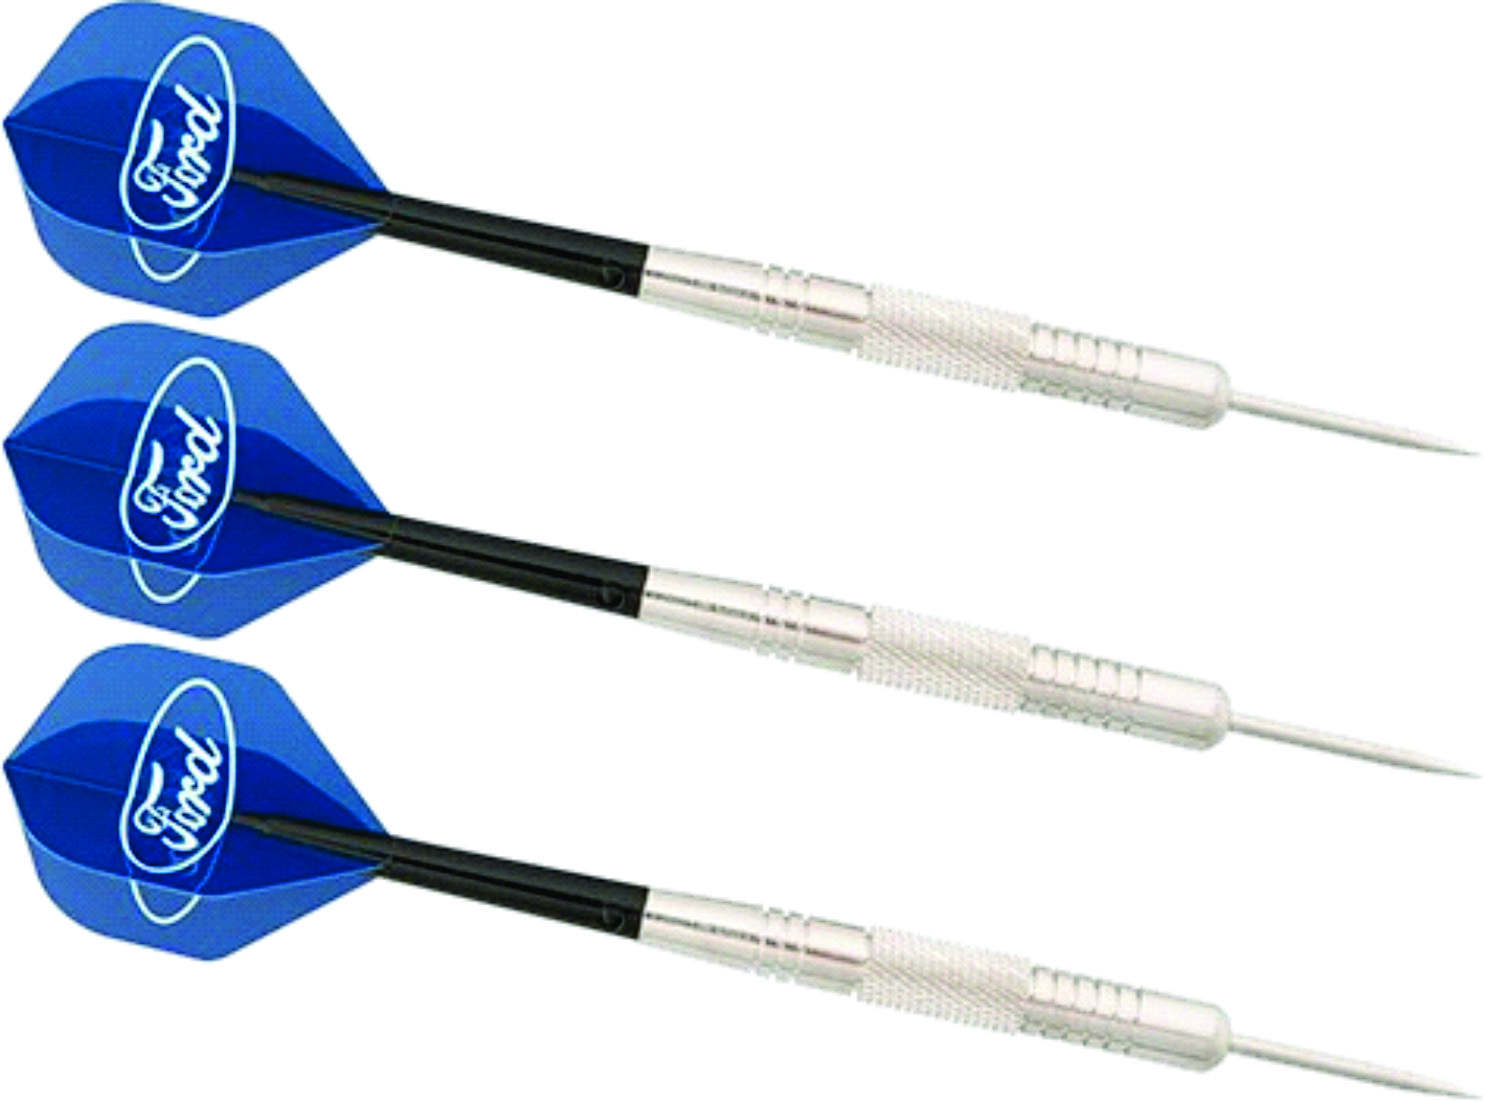 Ford Steel Tipped Darts 24g Set of Three